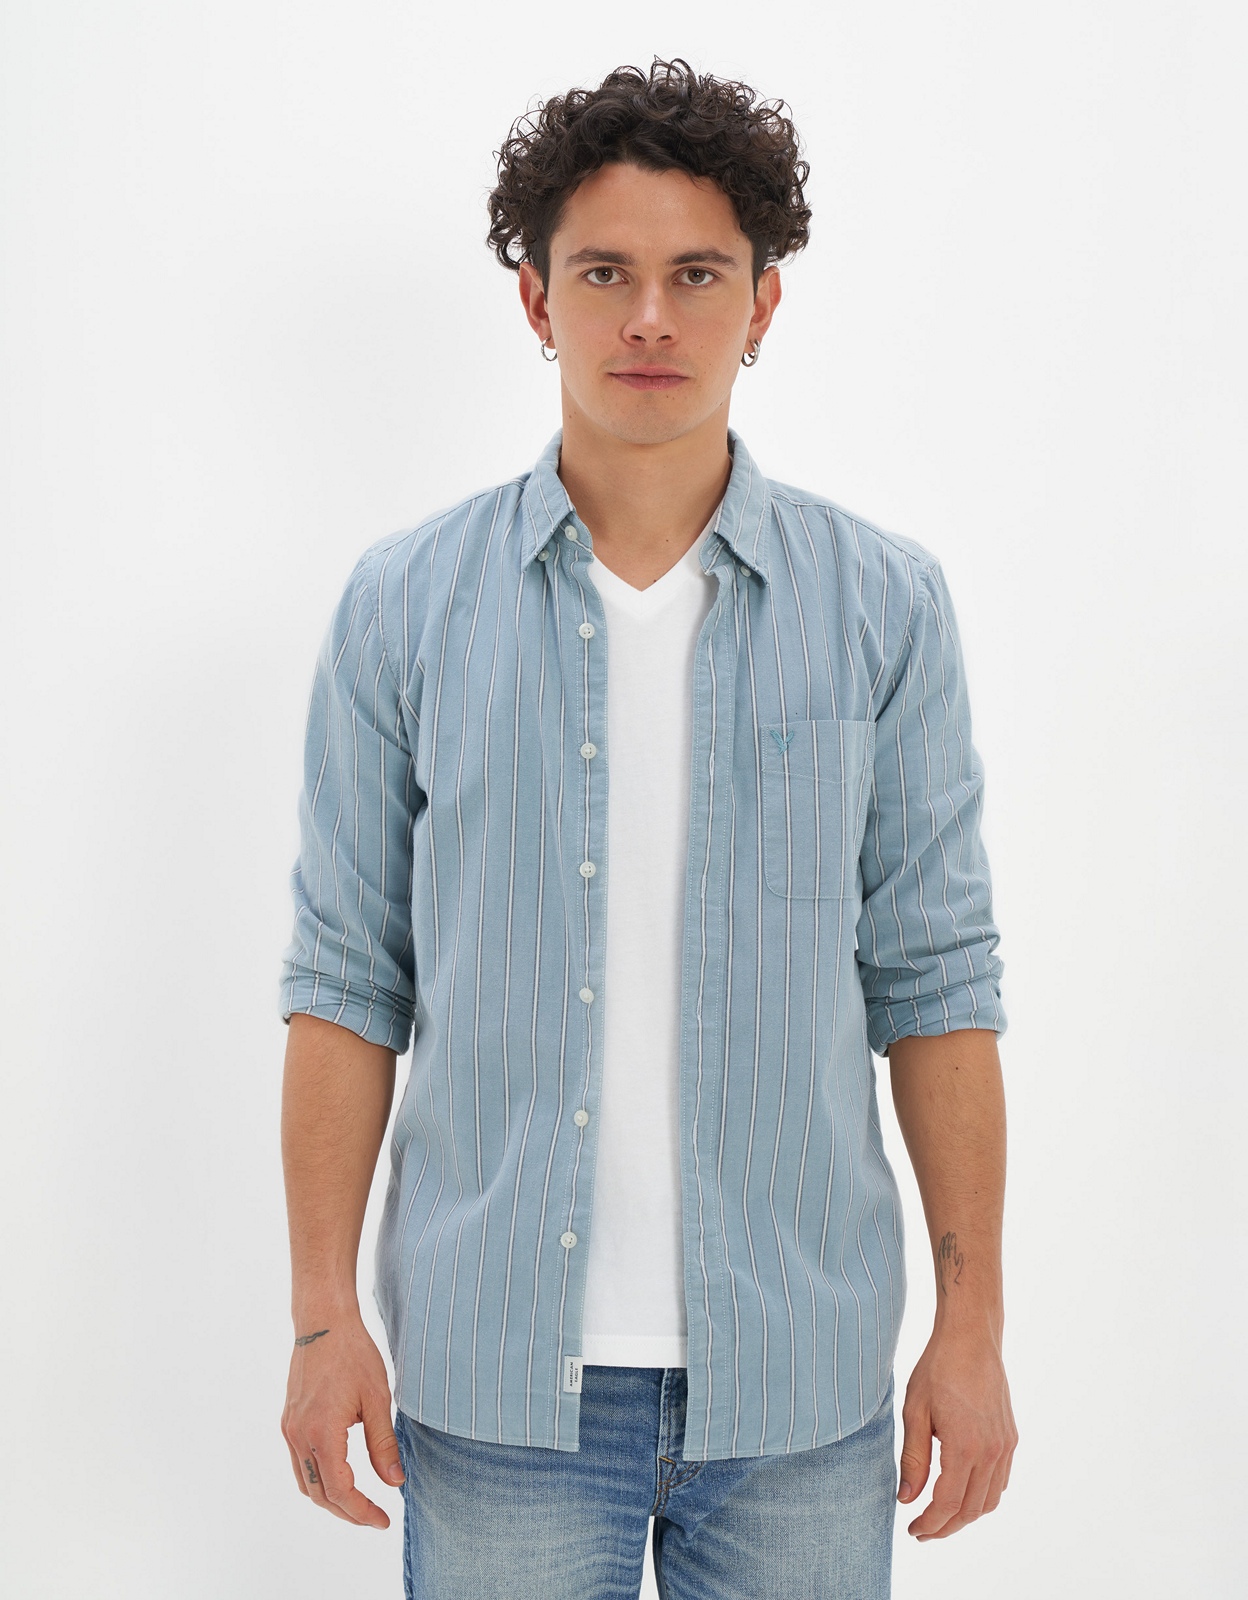 Shop AE Striped Slim Fit Oxford Button-Up Shirt online | American Eagle ...